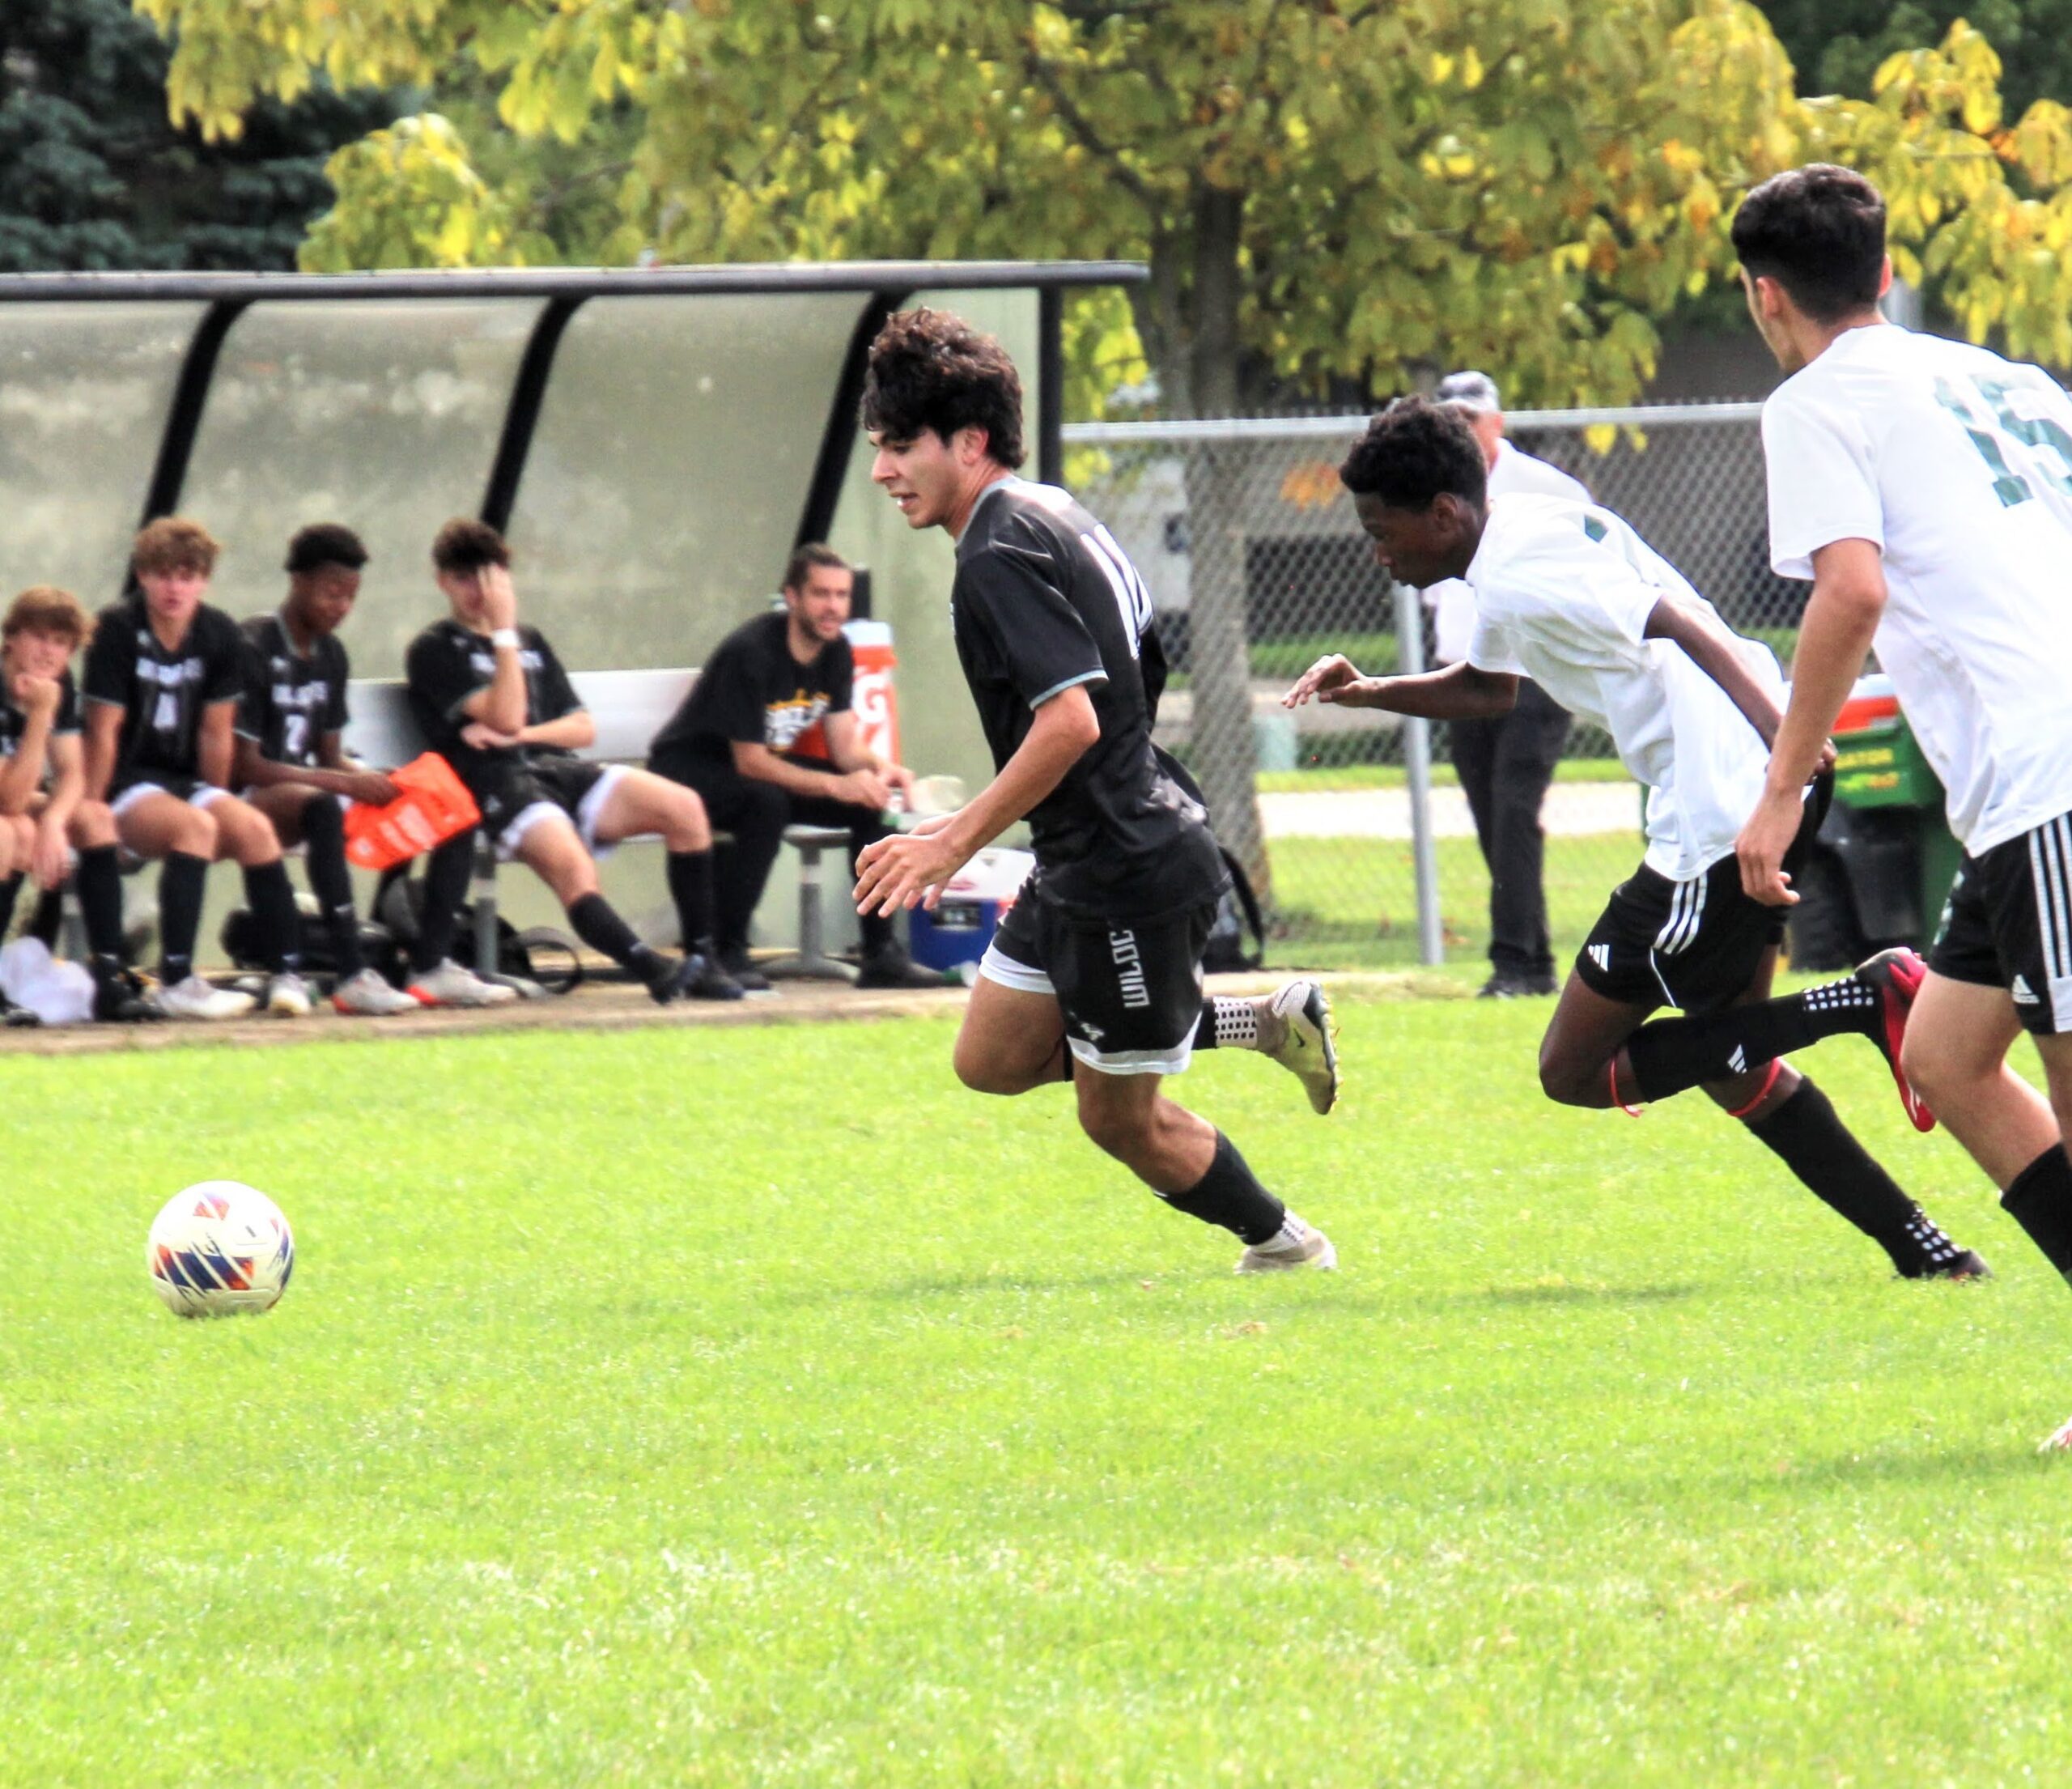 The Plymouth and Cass Tech soccer teams squared off in an official game Saturday PHOTO LISA MARTINEZ